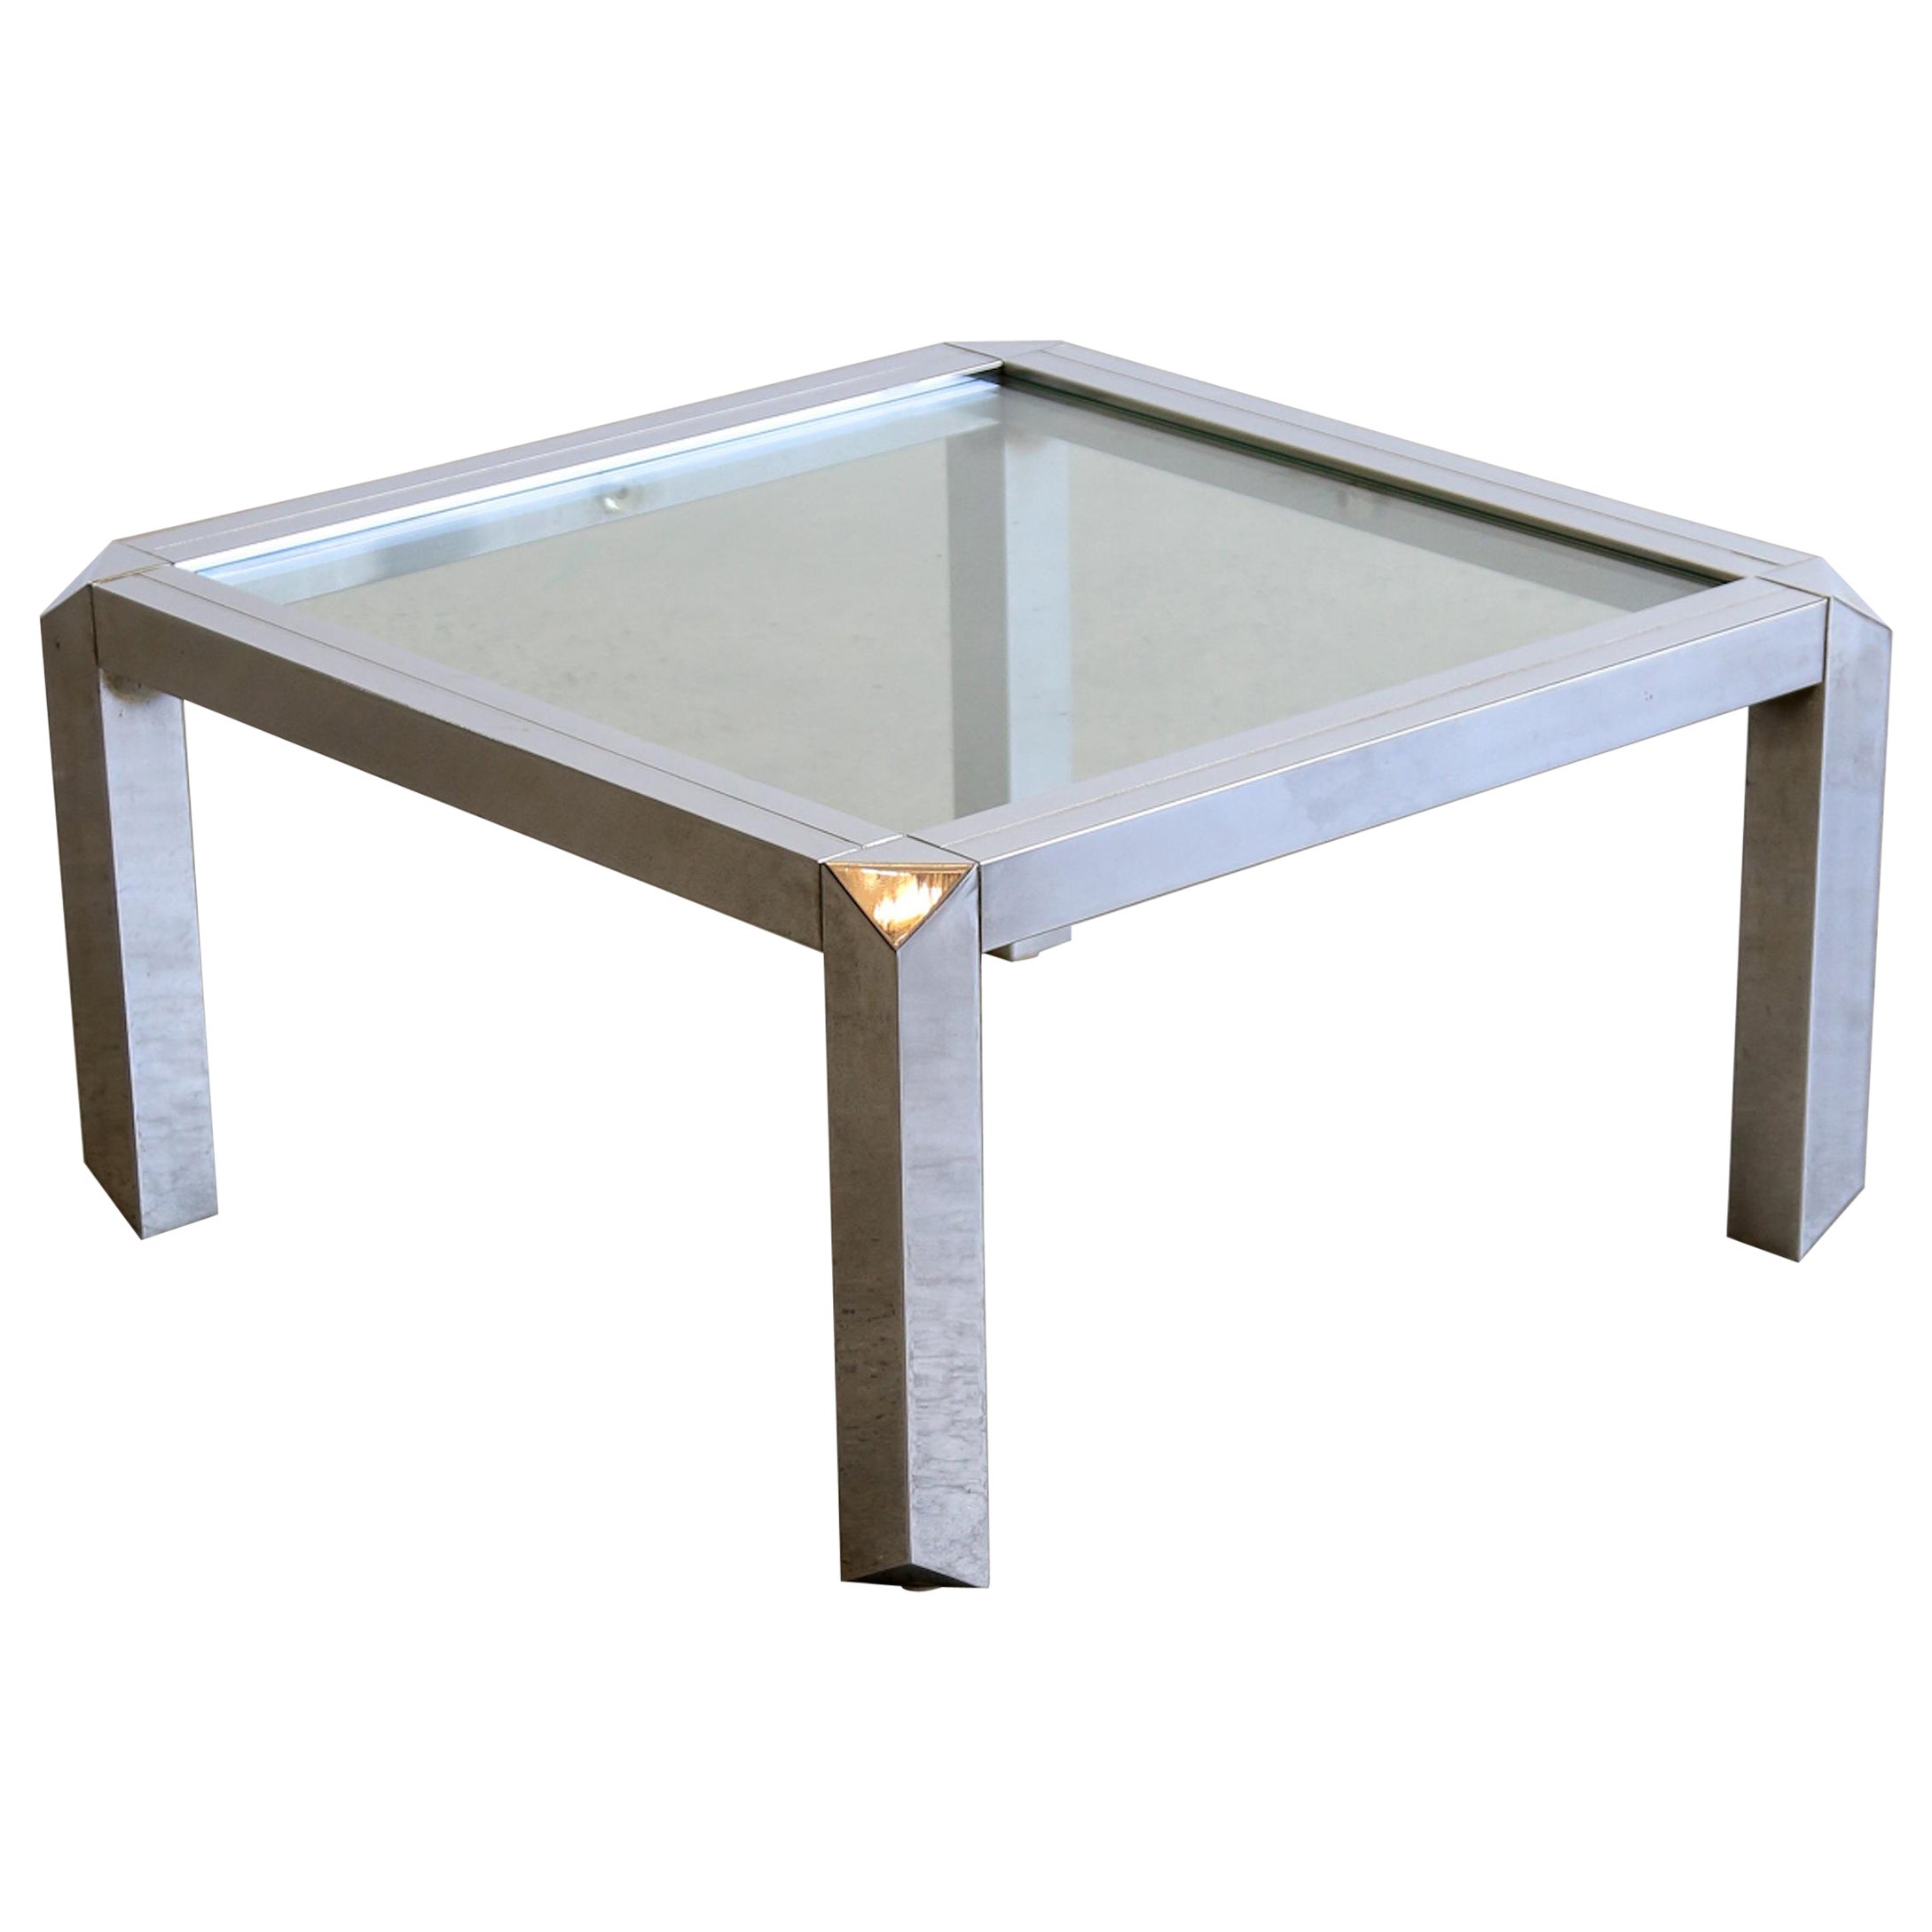 Italian Mid Century Modern Chrome & Smoked Glass Square Coffee Table For Sale